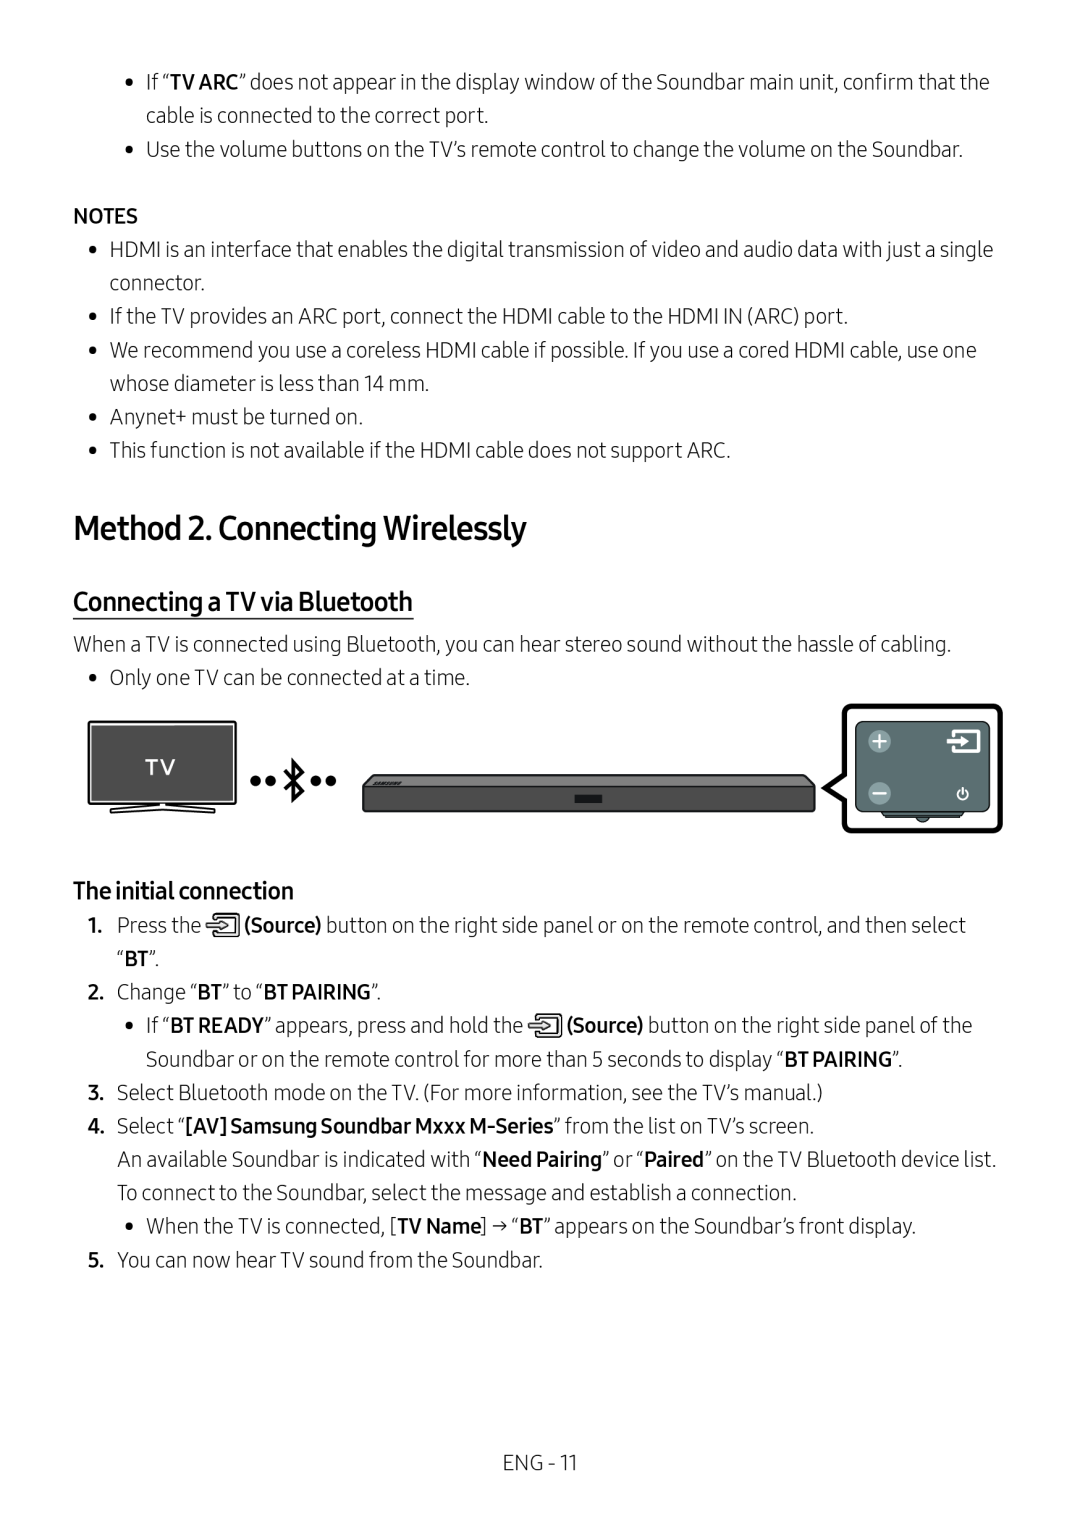 Samsung HW-M460/XE, HW-M450/EN manual Method 2. Connecting Wirelessly, Connecting a TV via Bluetooth, The initial connection 